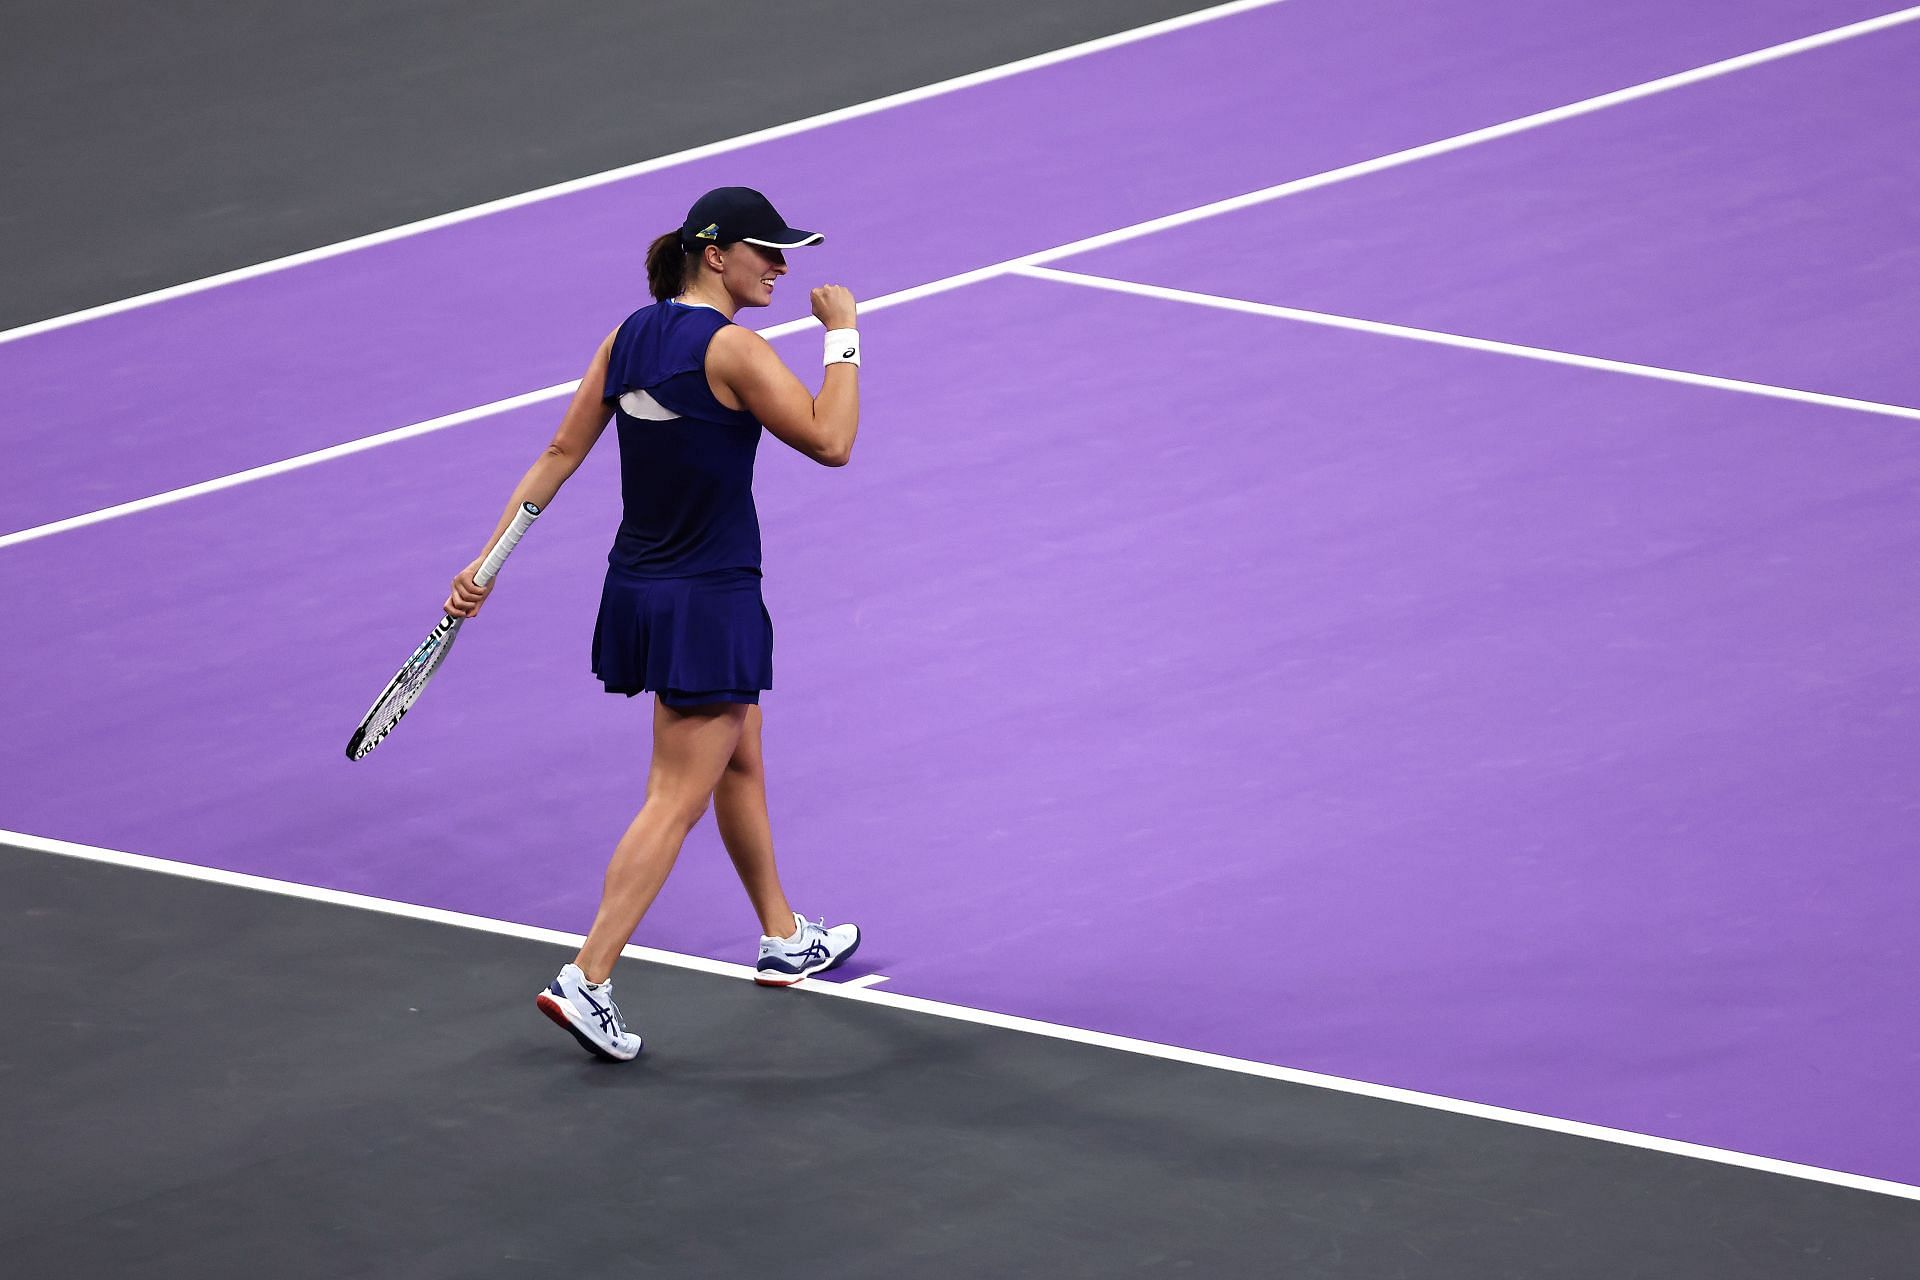 Iga Swiatek celebrates after defeating Coco Gauff at the 2022 WTA Finals.